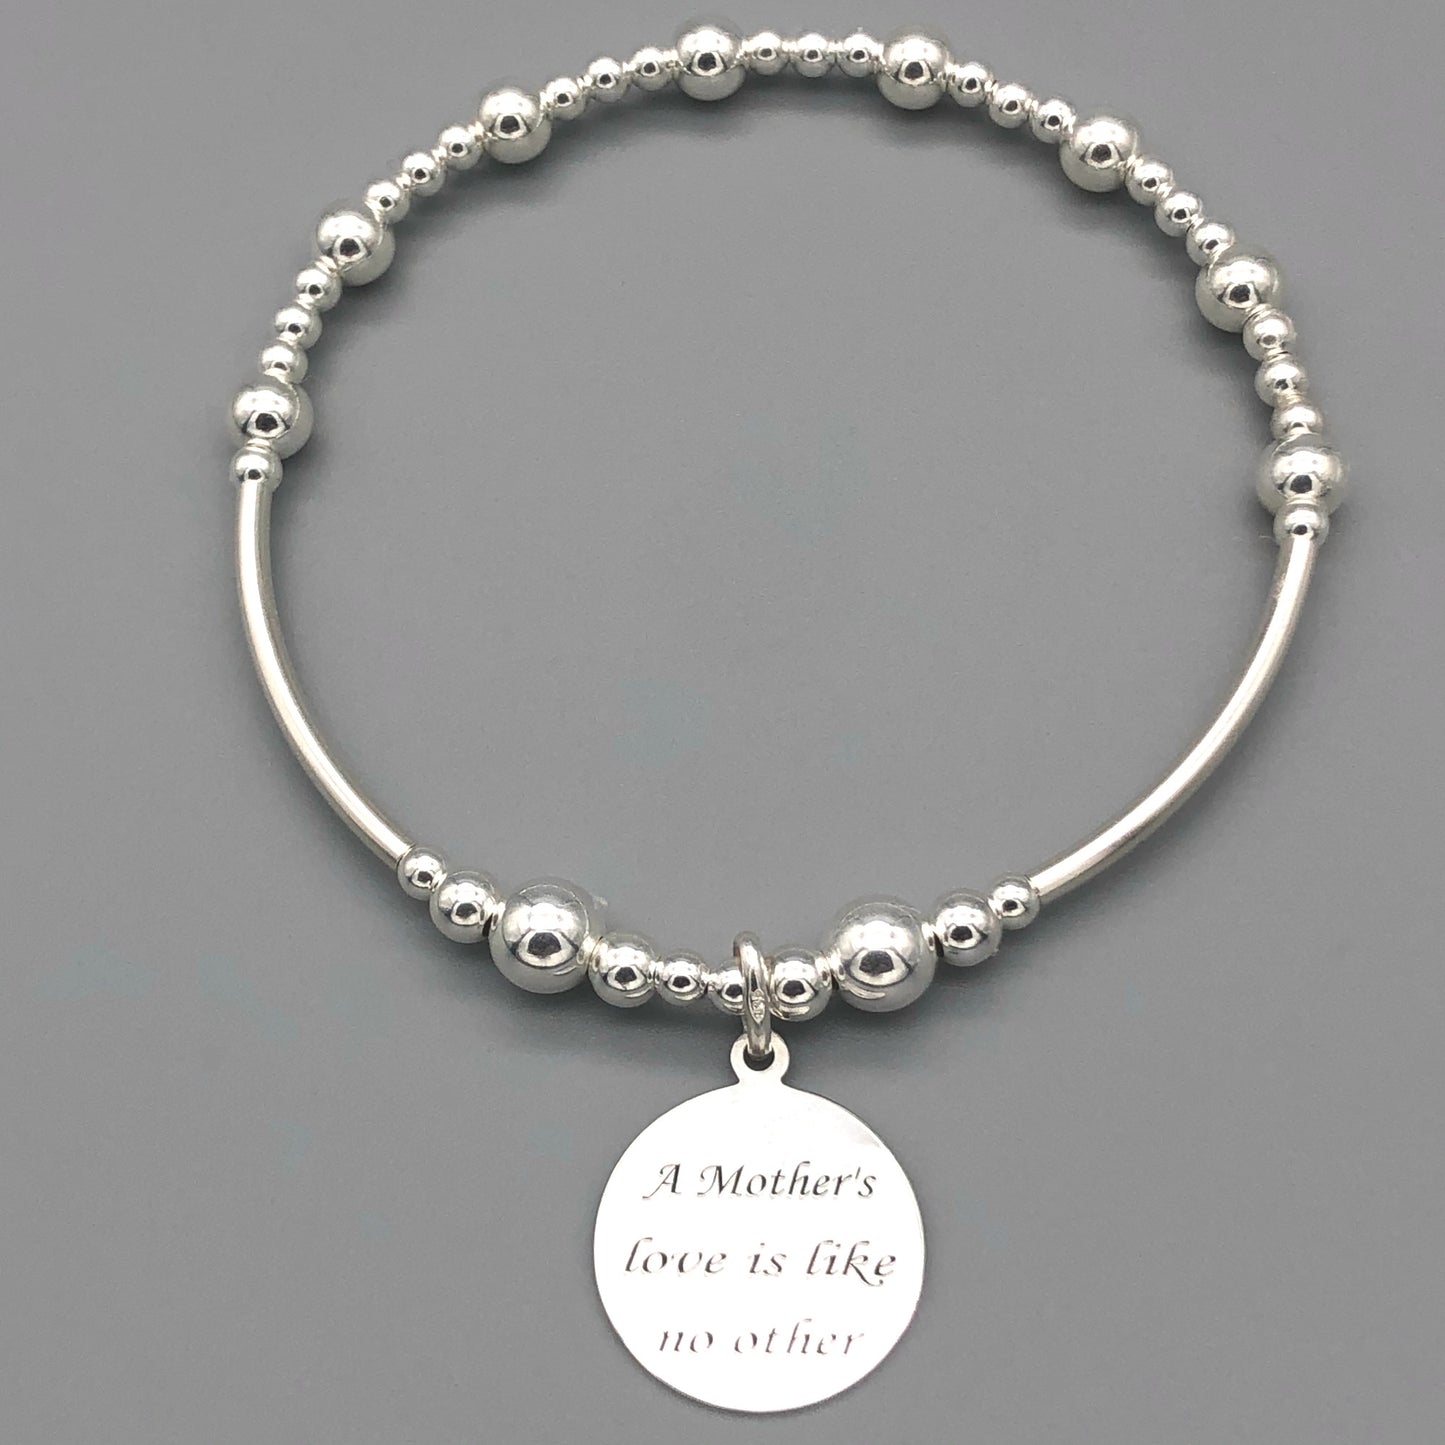 "Mother's love is like no other" sterling silver women's charm bracelet by My Silver Wish